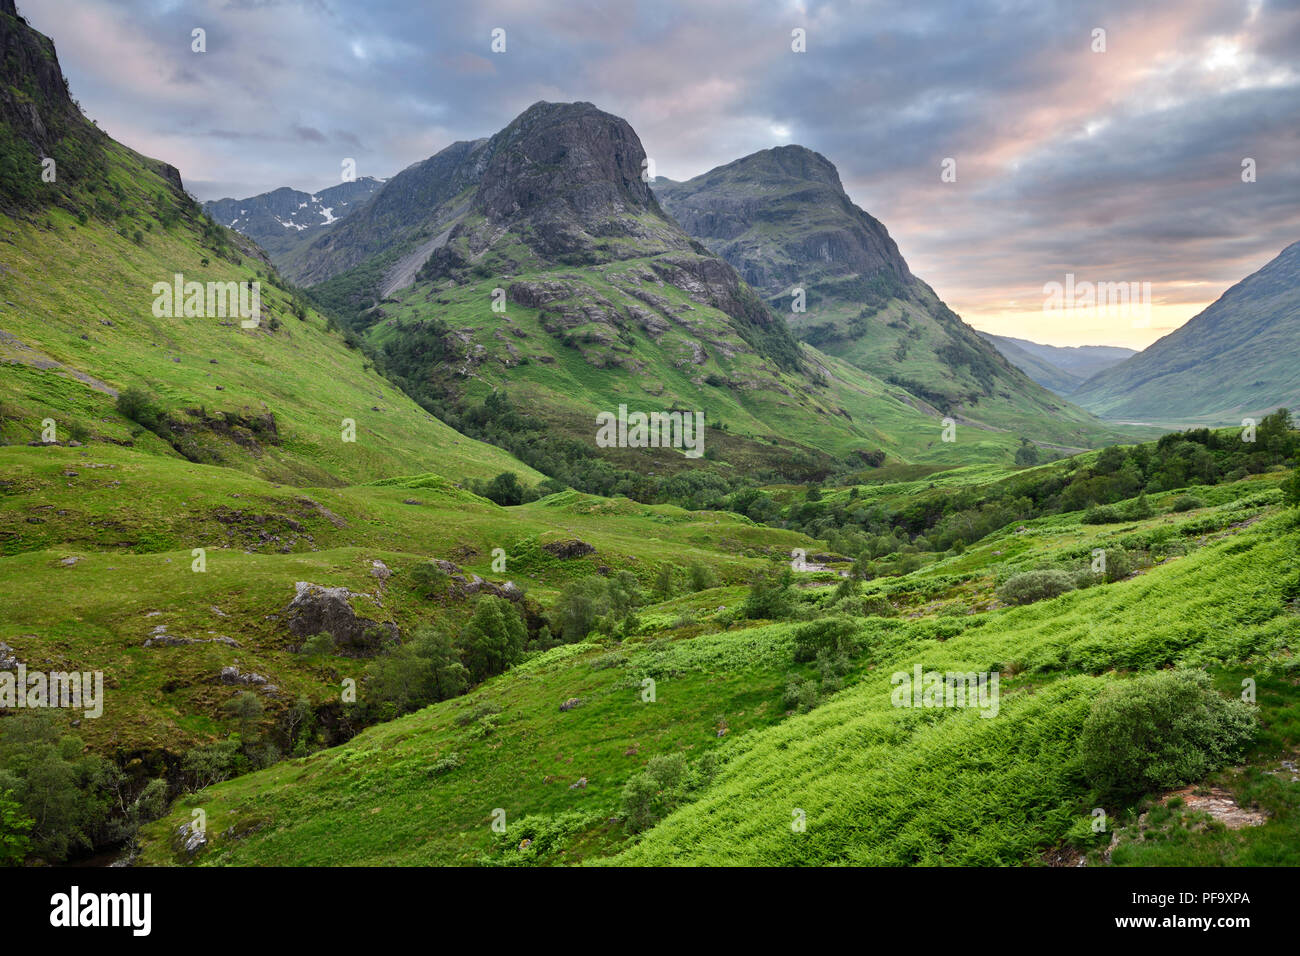 The Three Sisters peaks of Glen Coe with snow capped Bidean nam Bian and River Coe Scottish Highlands Scotland UK Stock Photo